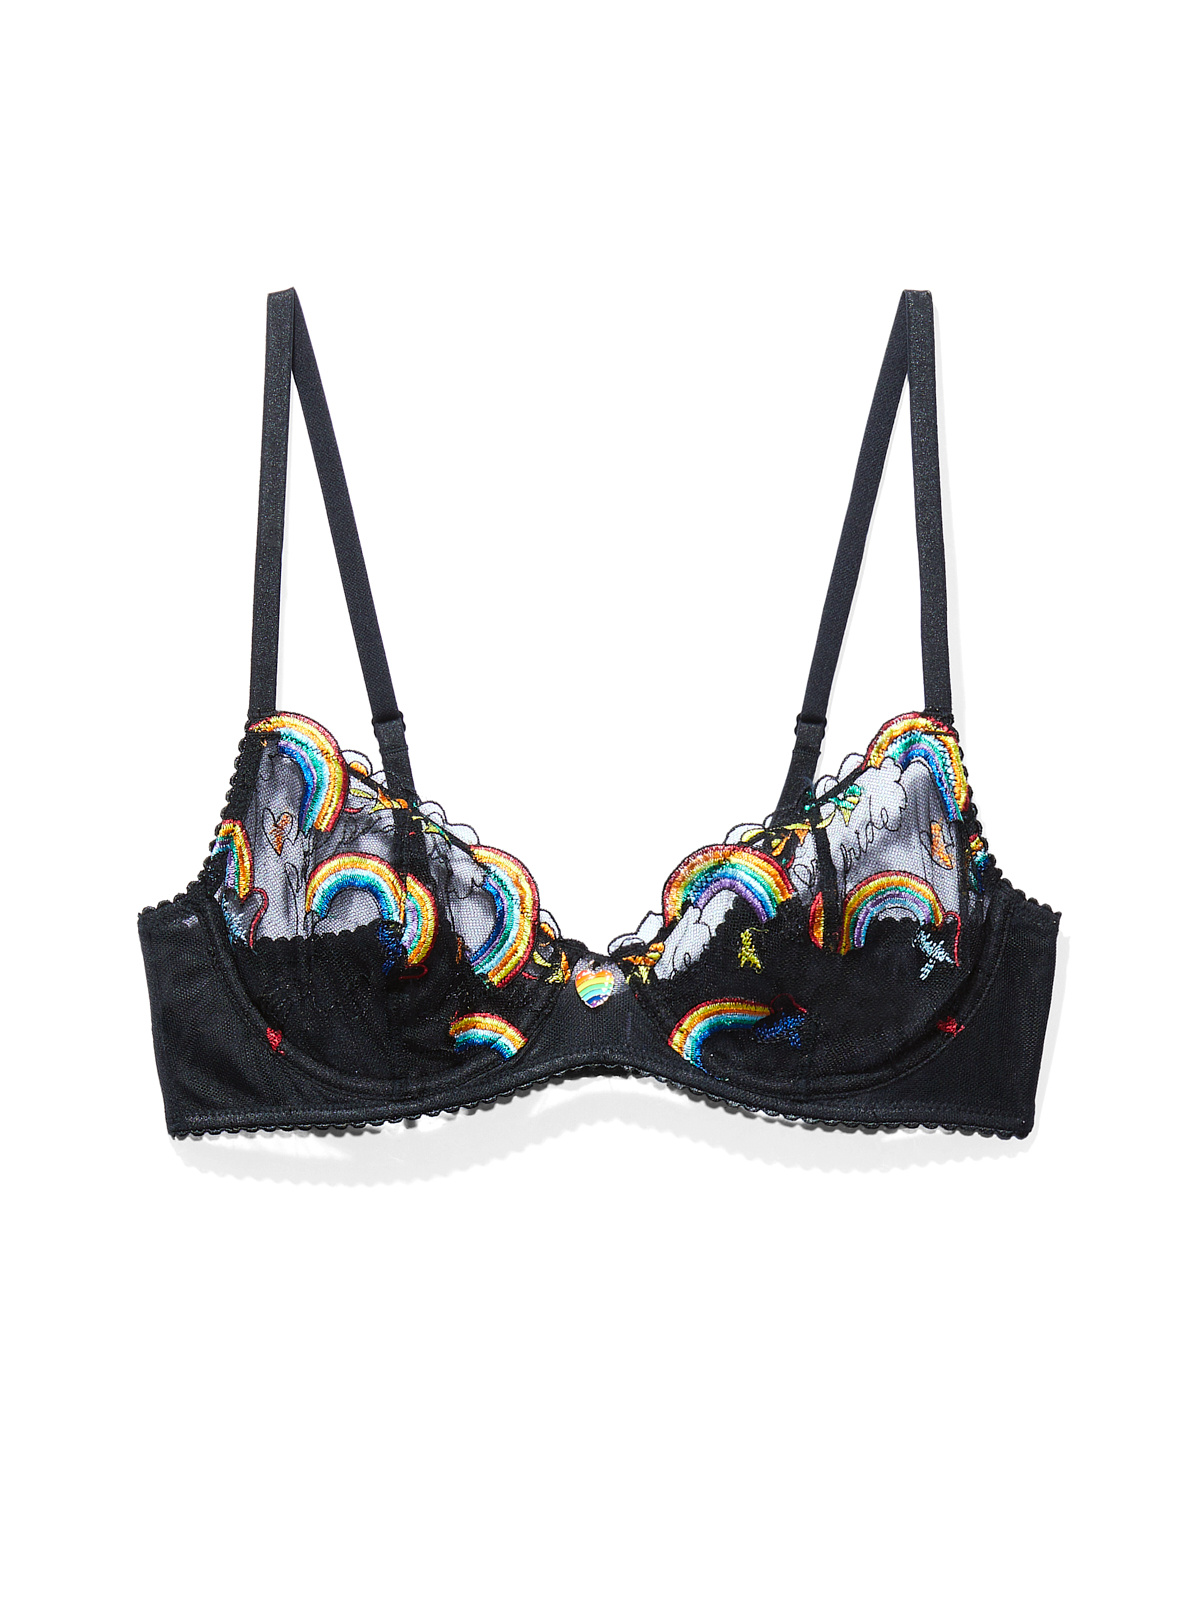 SAVAGE x FENTY Free Spirit Floral Embroidery Balconette Bra, I Made a  Career Out of Shopping, but These Are 15 Items on My Personal April Wish  List